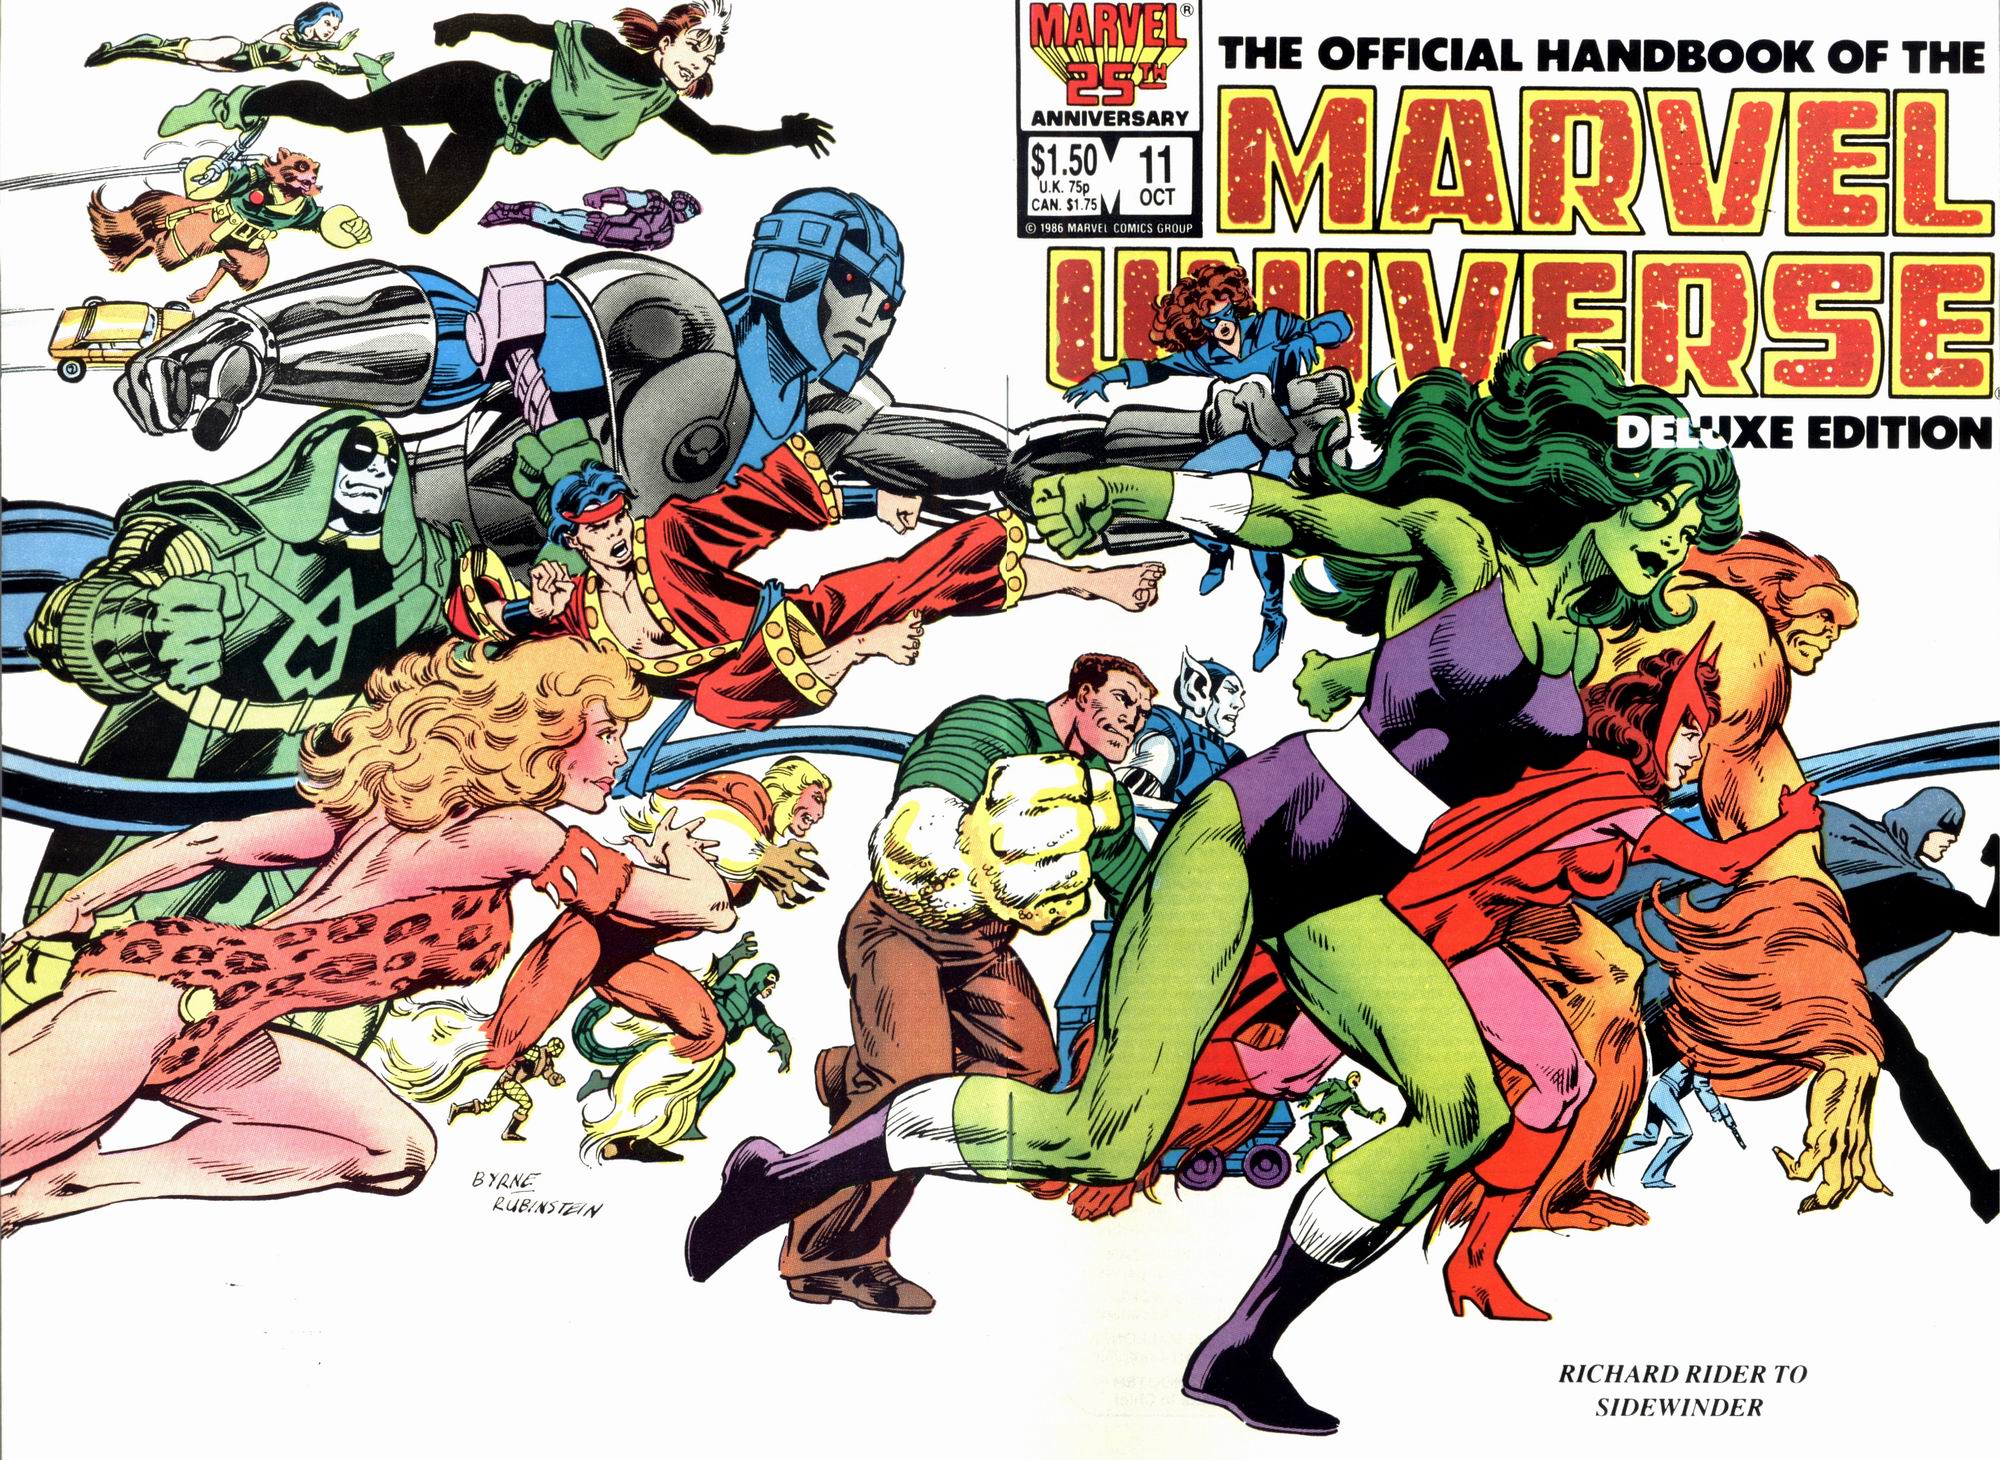 Read online The Official Handbook of the Marvel Universe Deluxe Edition comic -  Issue #11 - 1